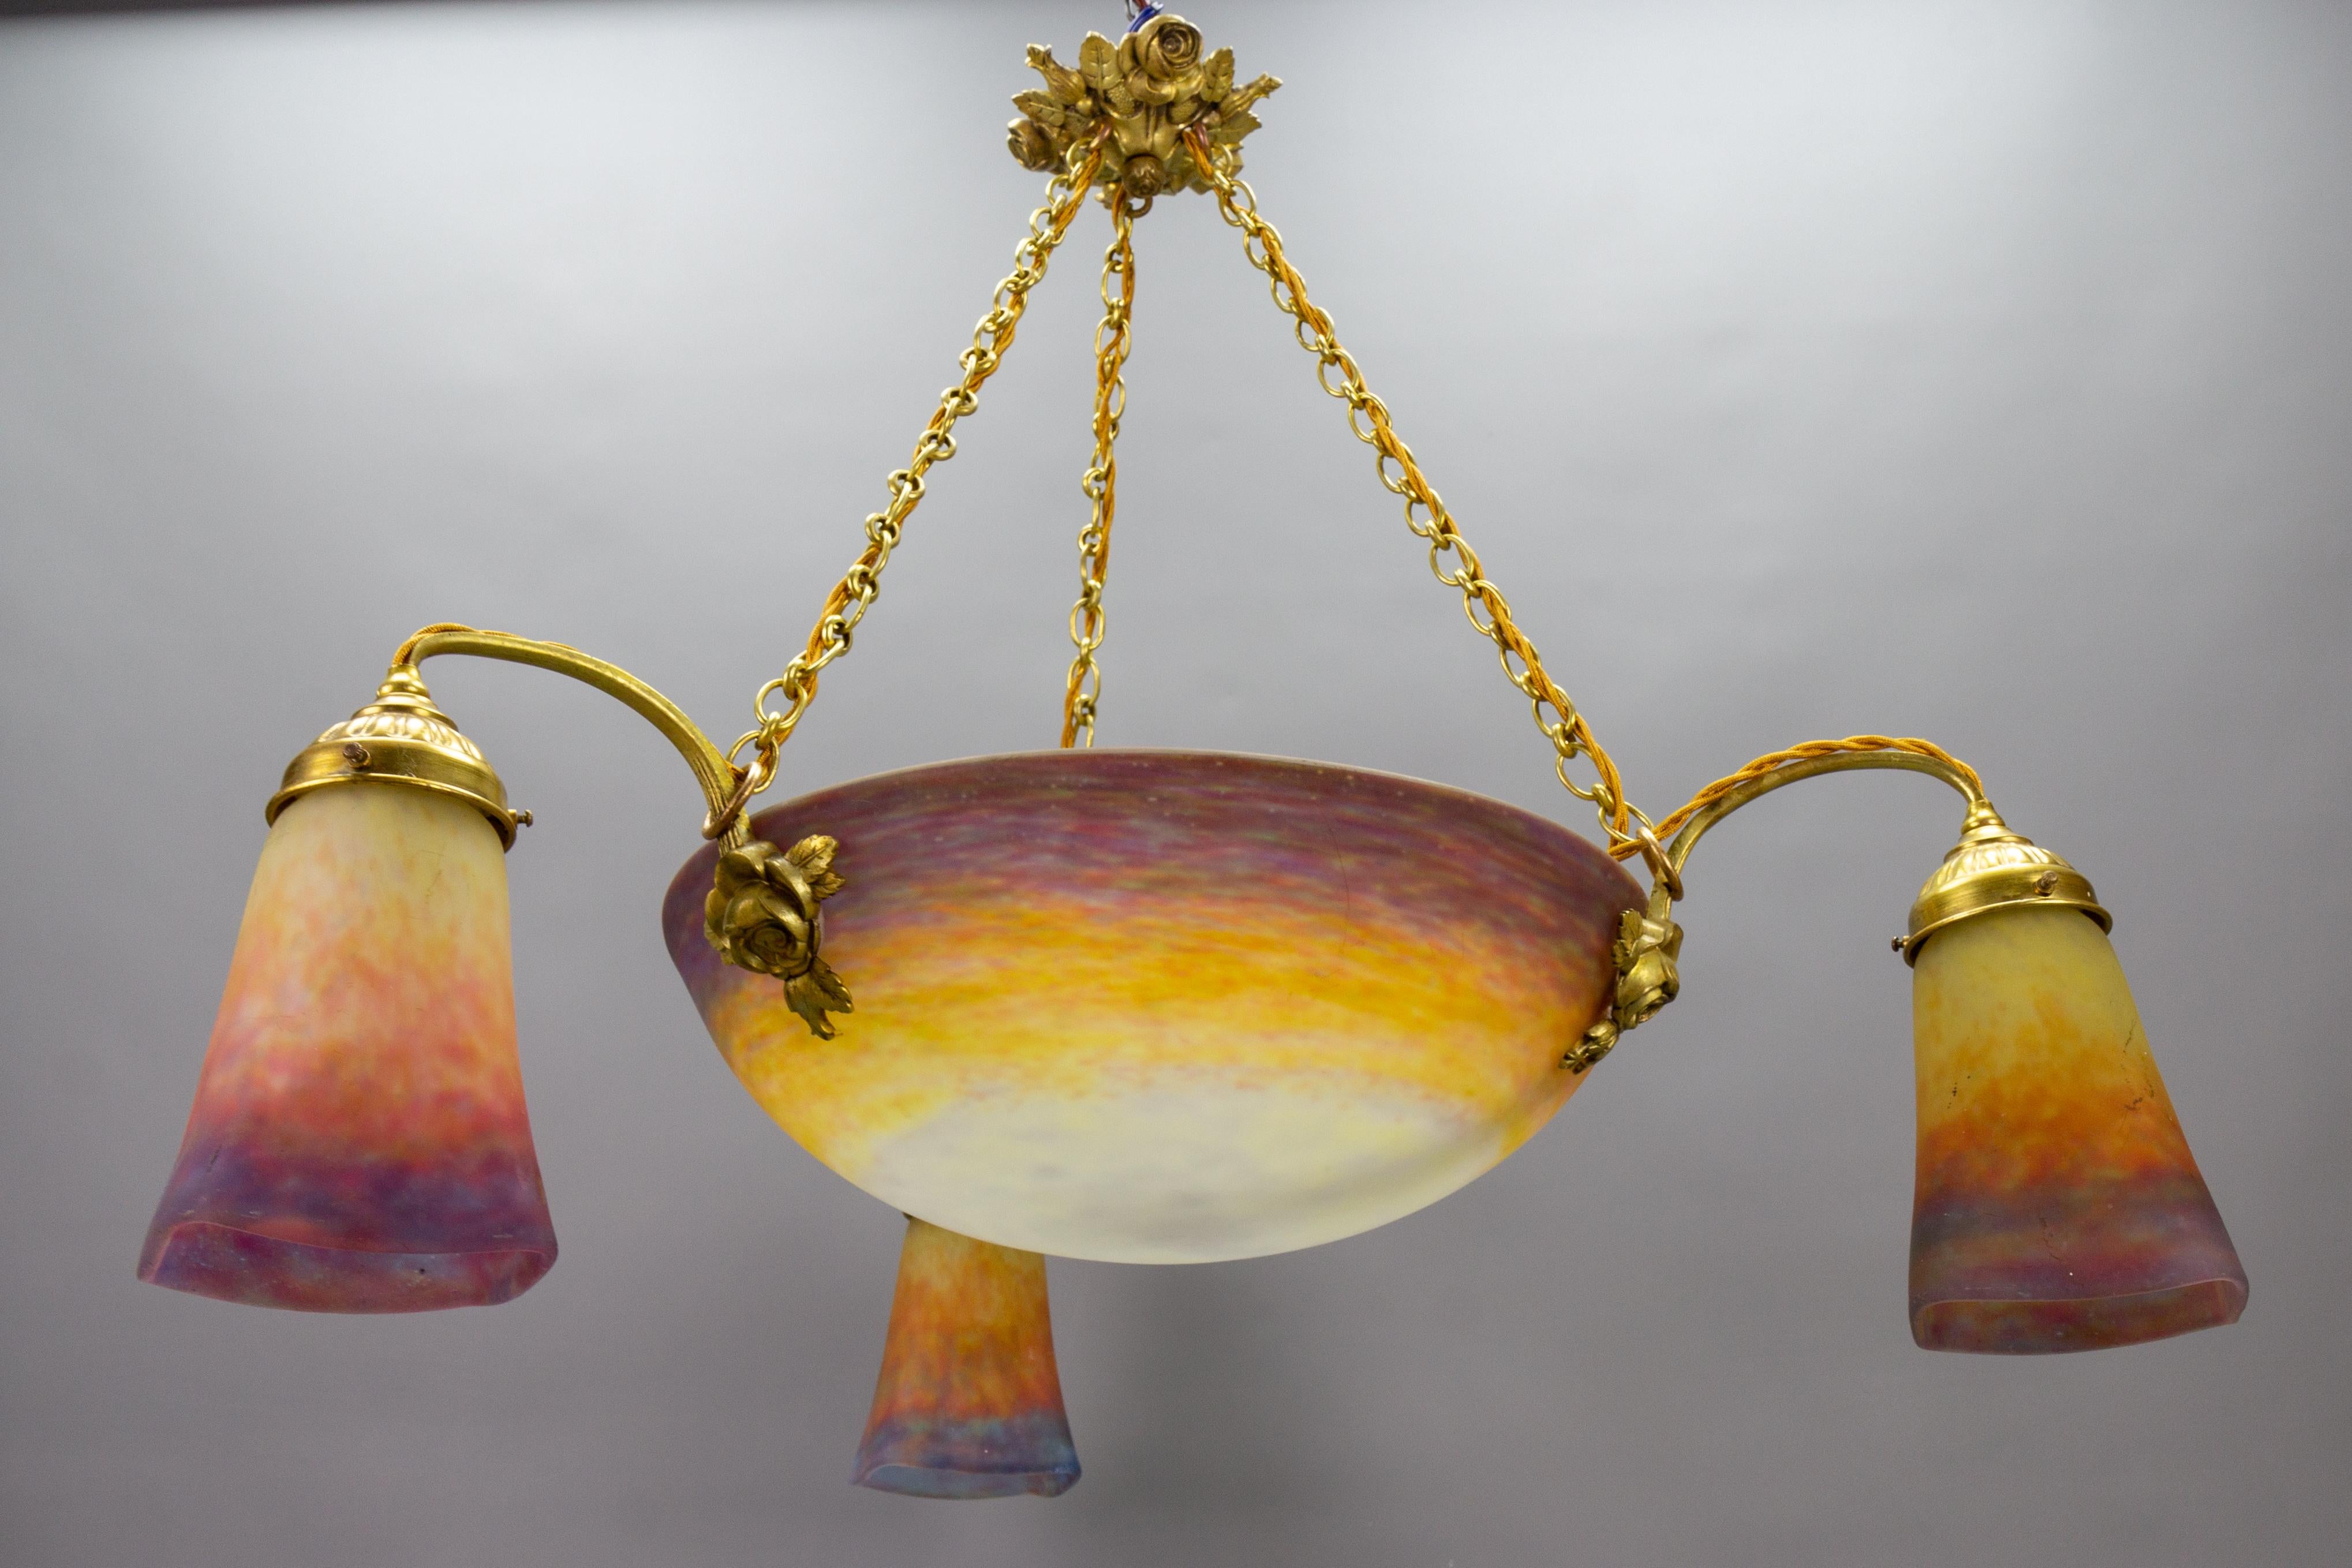 French Art Nouveau bronze and Muller Frères Lunéville polychrome glass four-light chandelier, circa 1920.
This impressive French Art Nouveau period chandelier features a mottled “Pâte de Verre” central, beautifully colored glass bowl and three glass